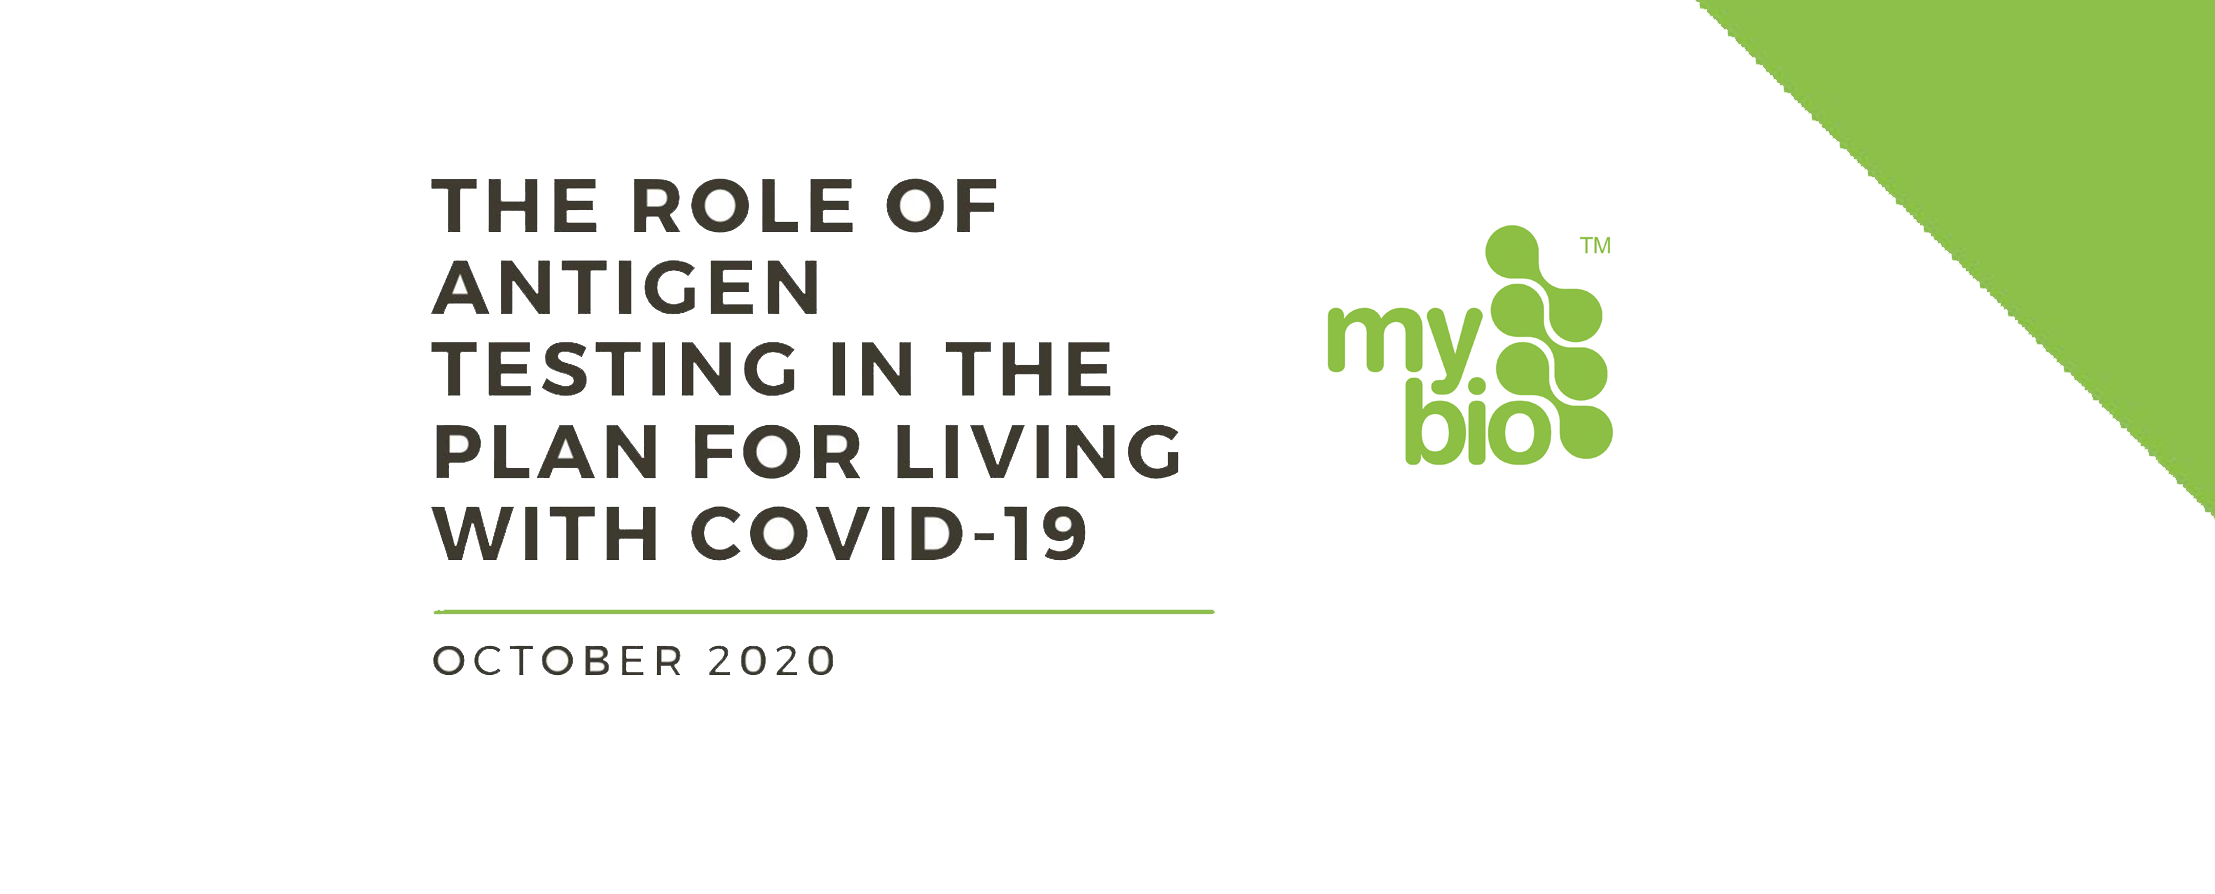 A White Paper - The role of antigen testing in the Plan for Living with Covid-19